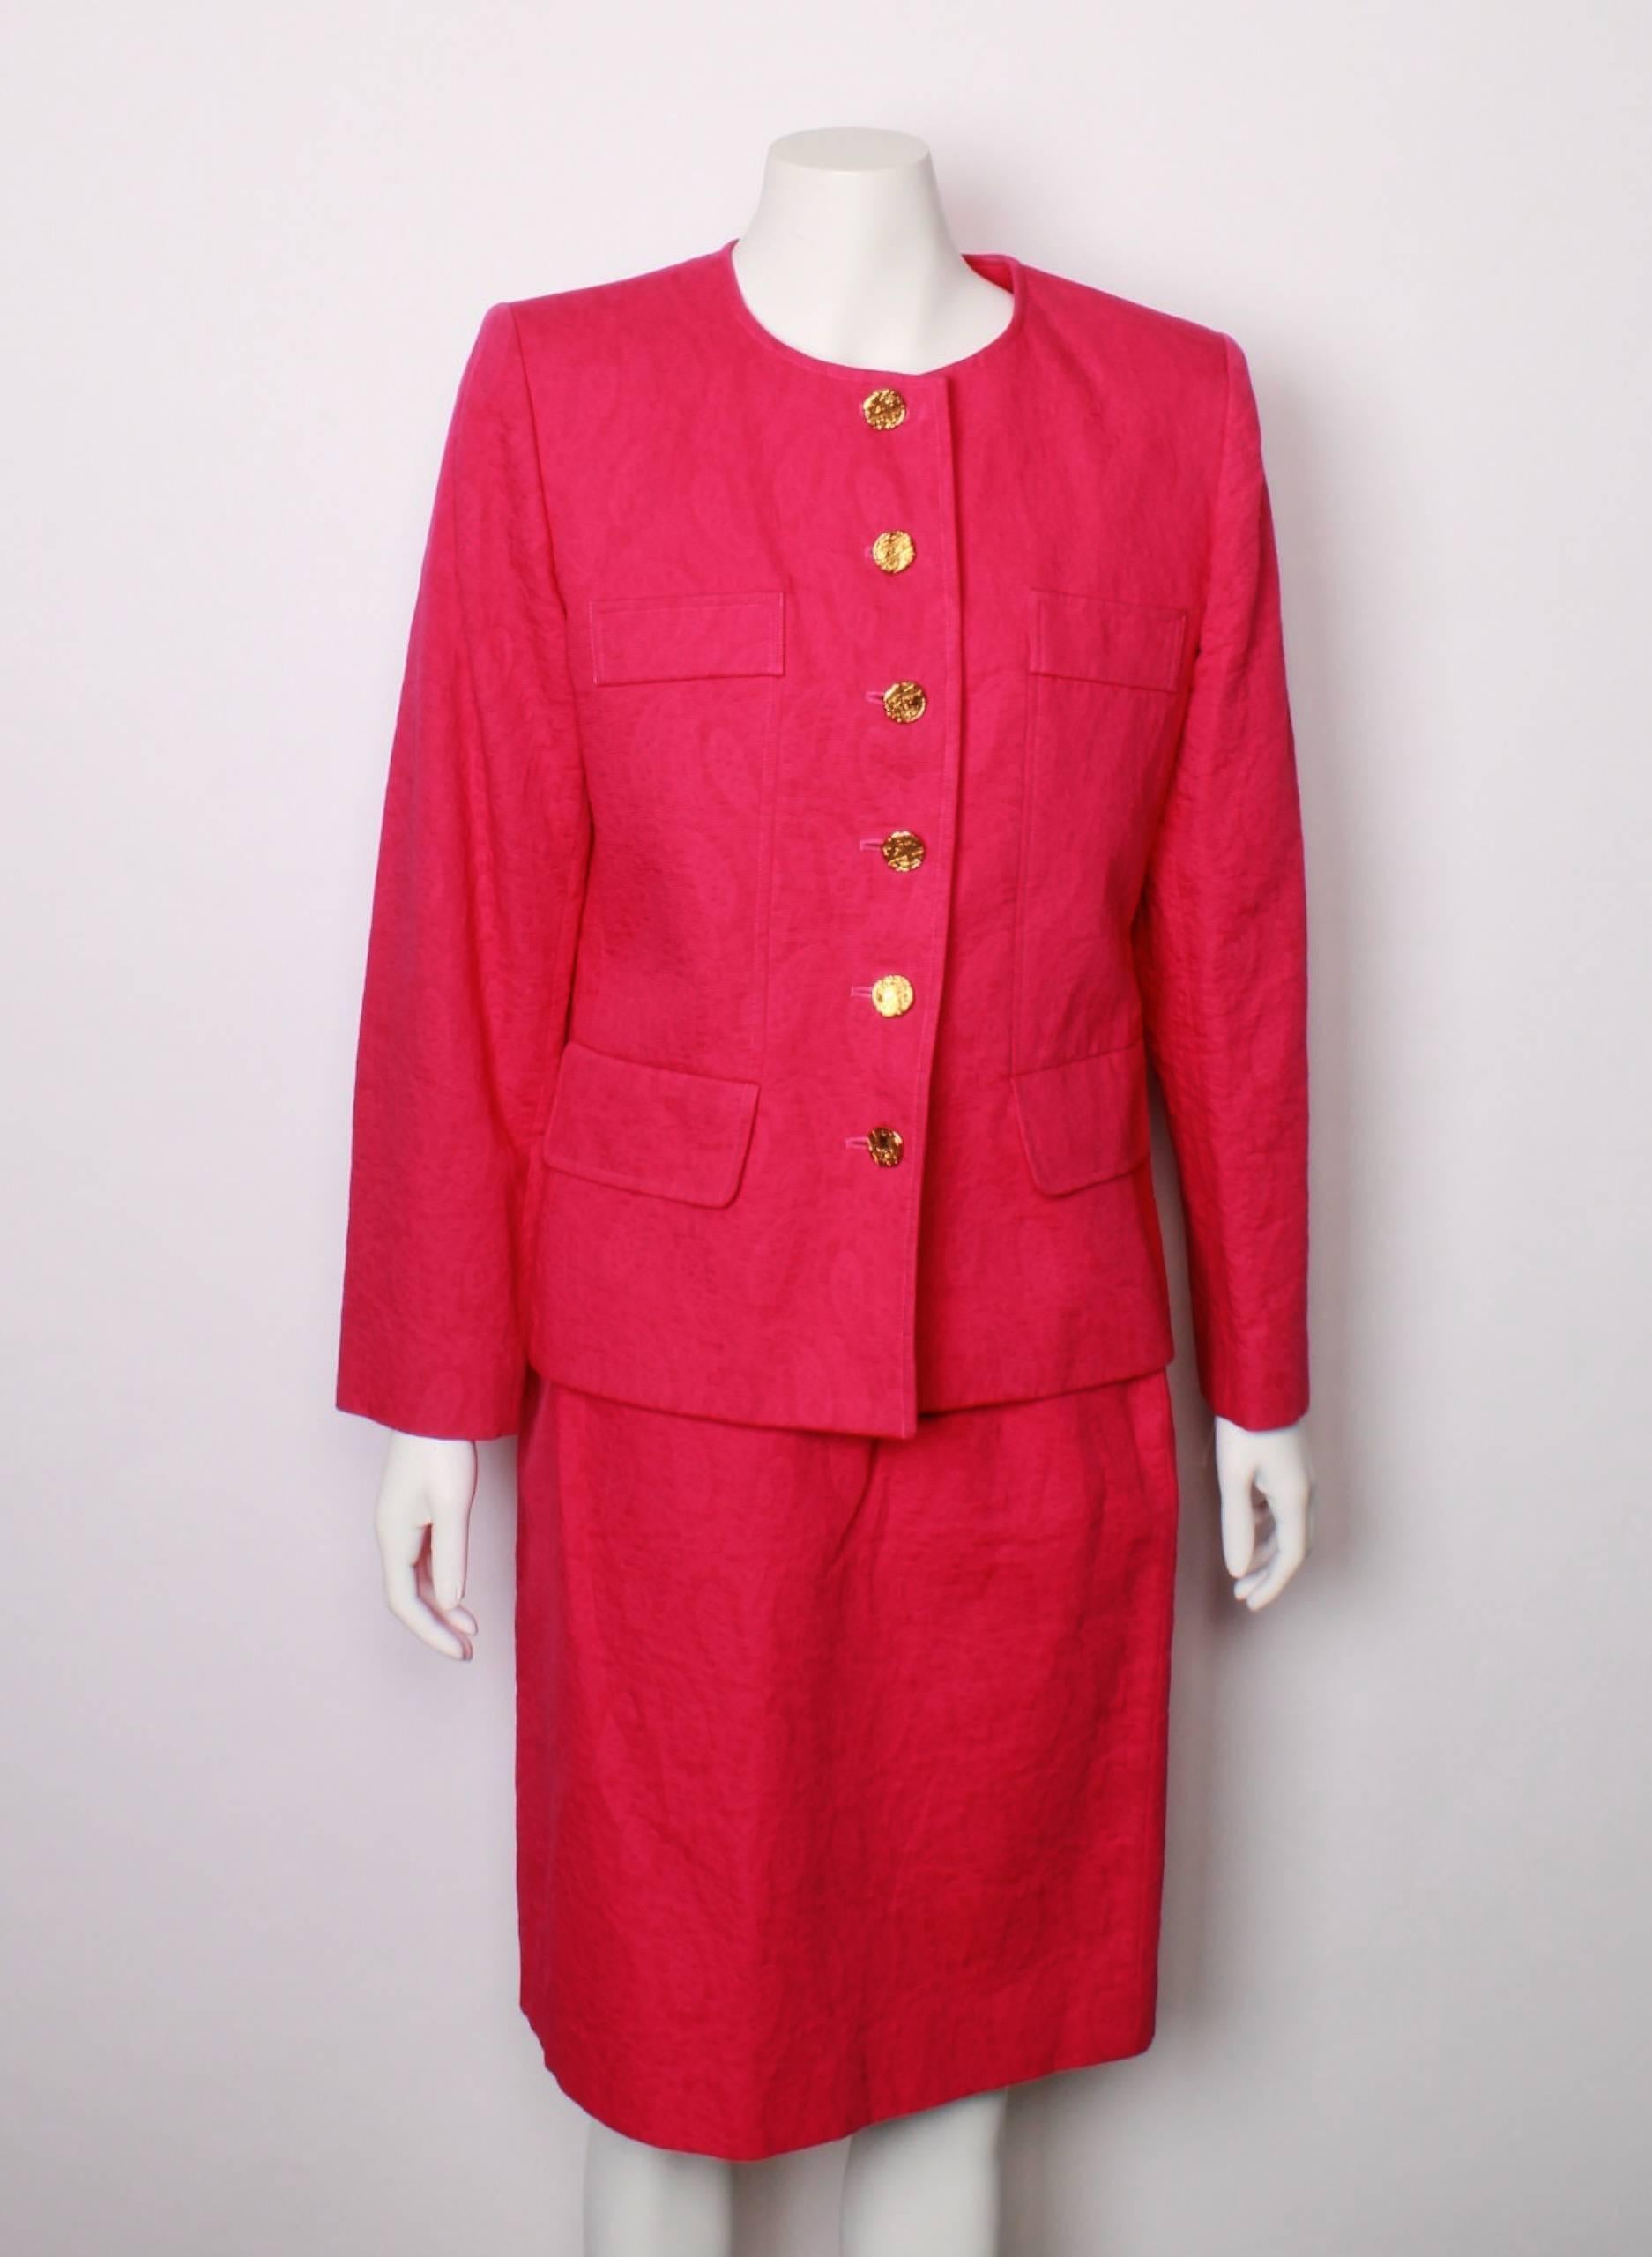 Yves Saint Laurent Variation 1980's   orchid pink cotton jacquard single breasted jacket and pencil skirt suit ensemble. Features beautiful ornate gold buttons and feature pockets. Jacquard has paisley pattern.
Jacket and skirt are fully lined. 
A